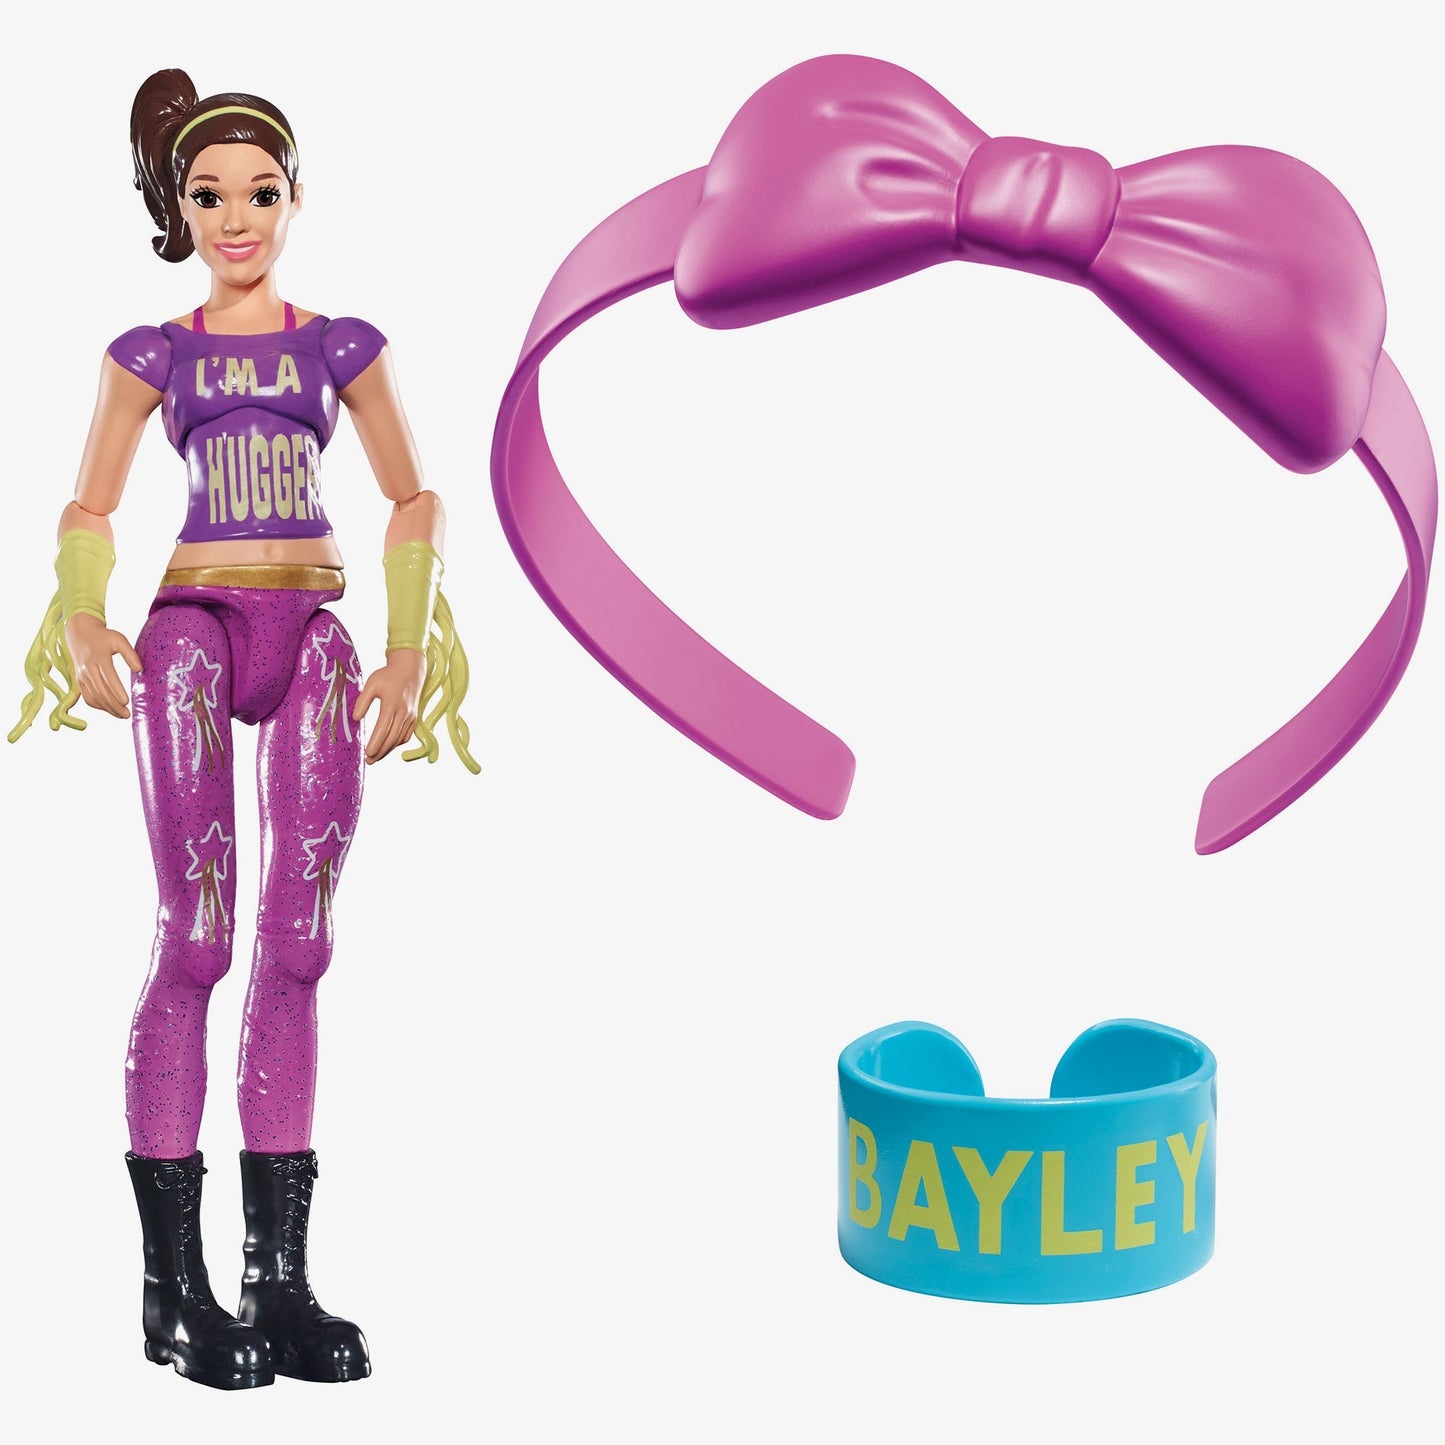 Bayley - WWE Girls Series Ultimate Fan Pack (With DVD & Accessories)